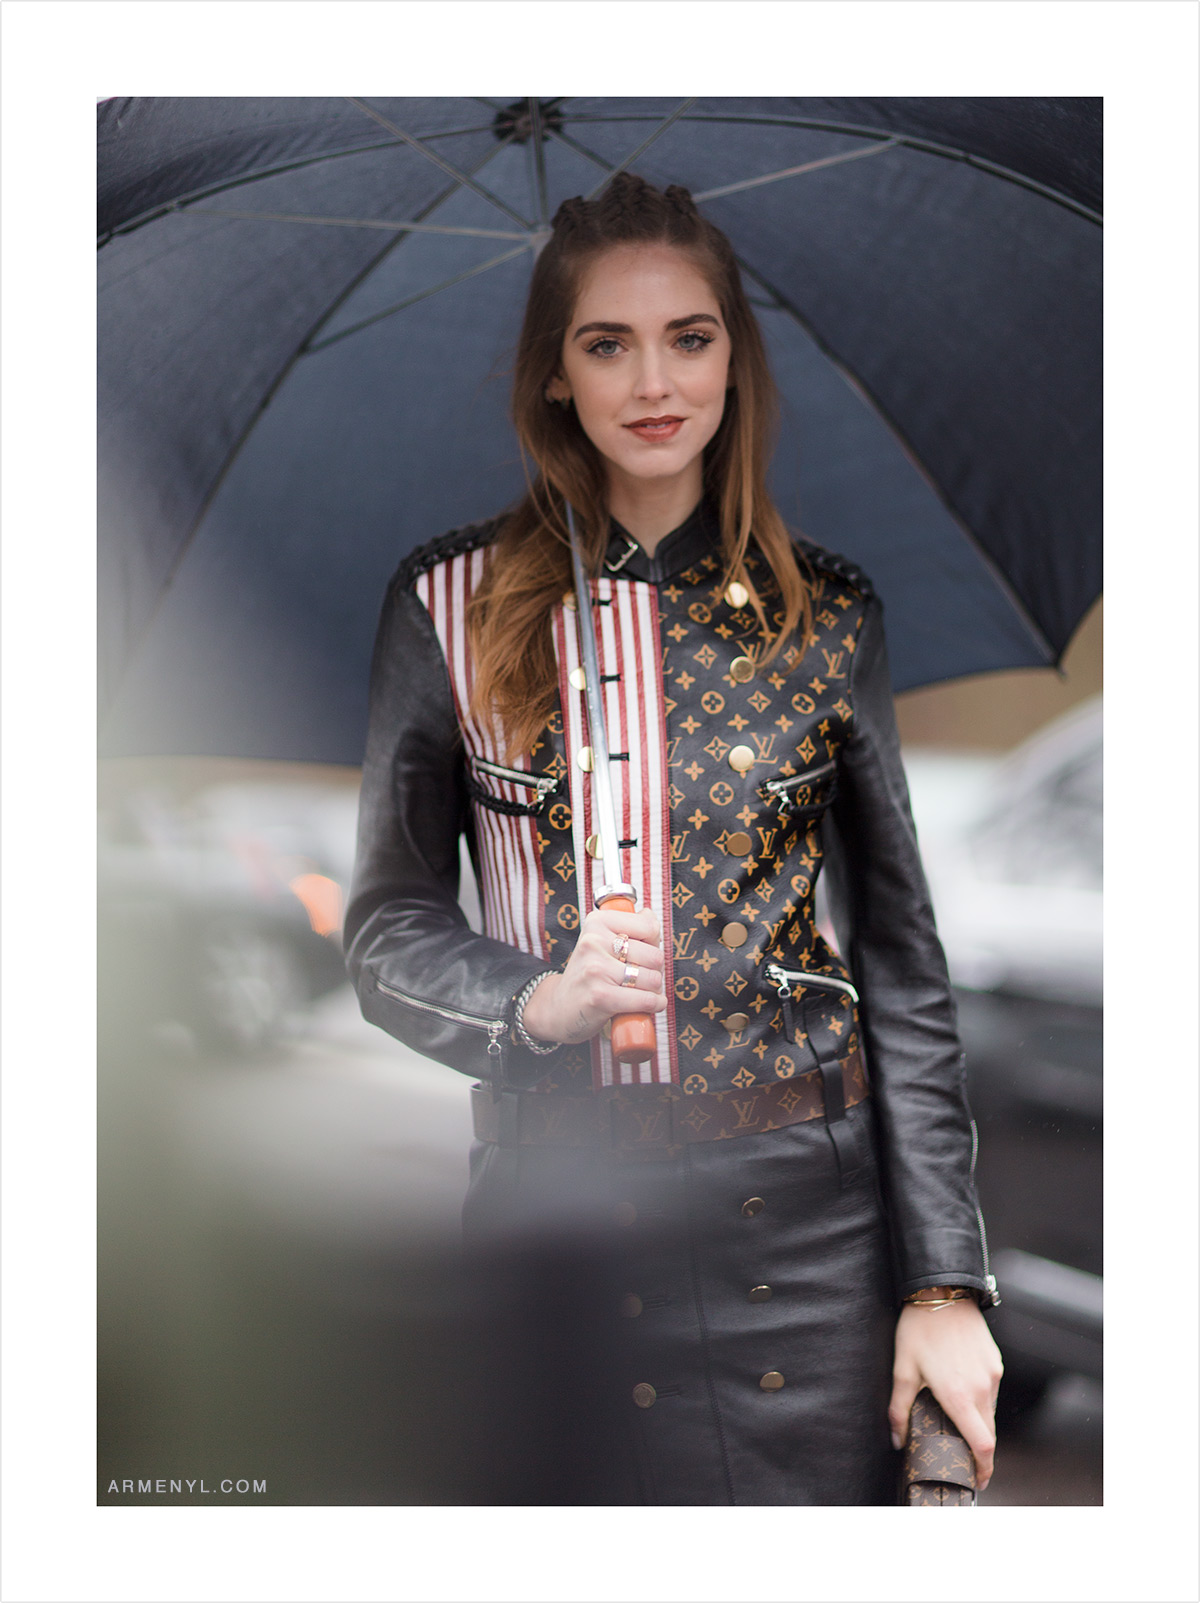 Chiara Ferragni at Louis Vuitton in the rain Street style at Louis Vuitton FW 16 show in Paris on March 9th photographed by Armenyl.com